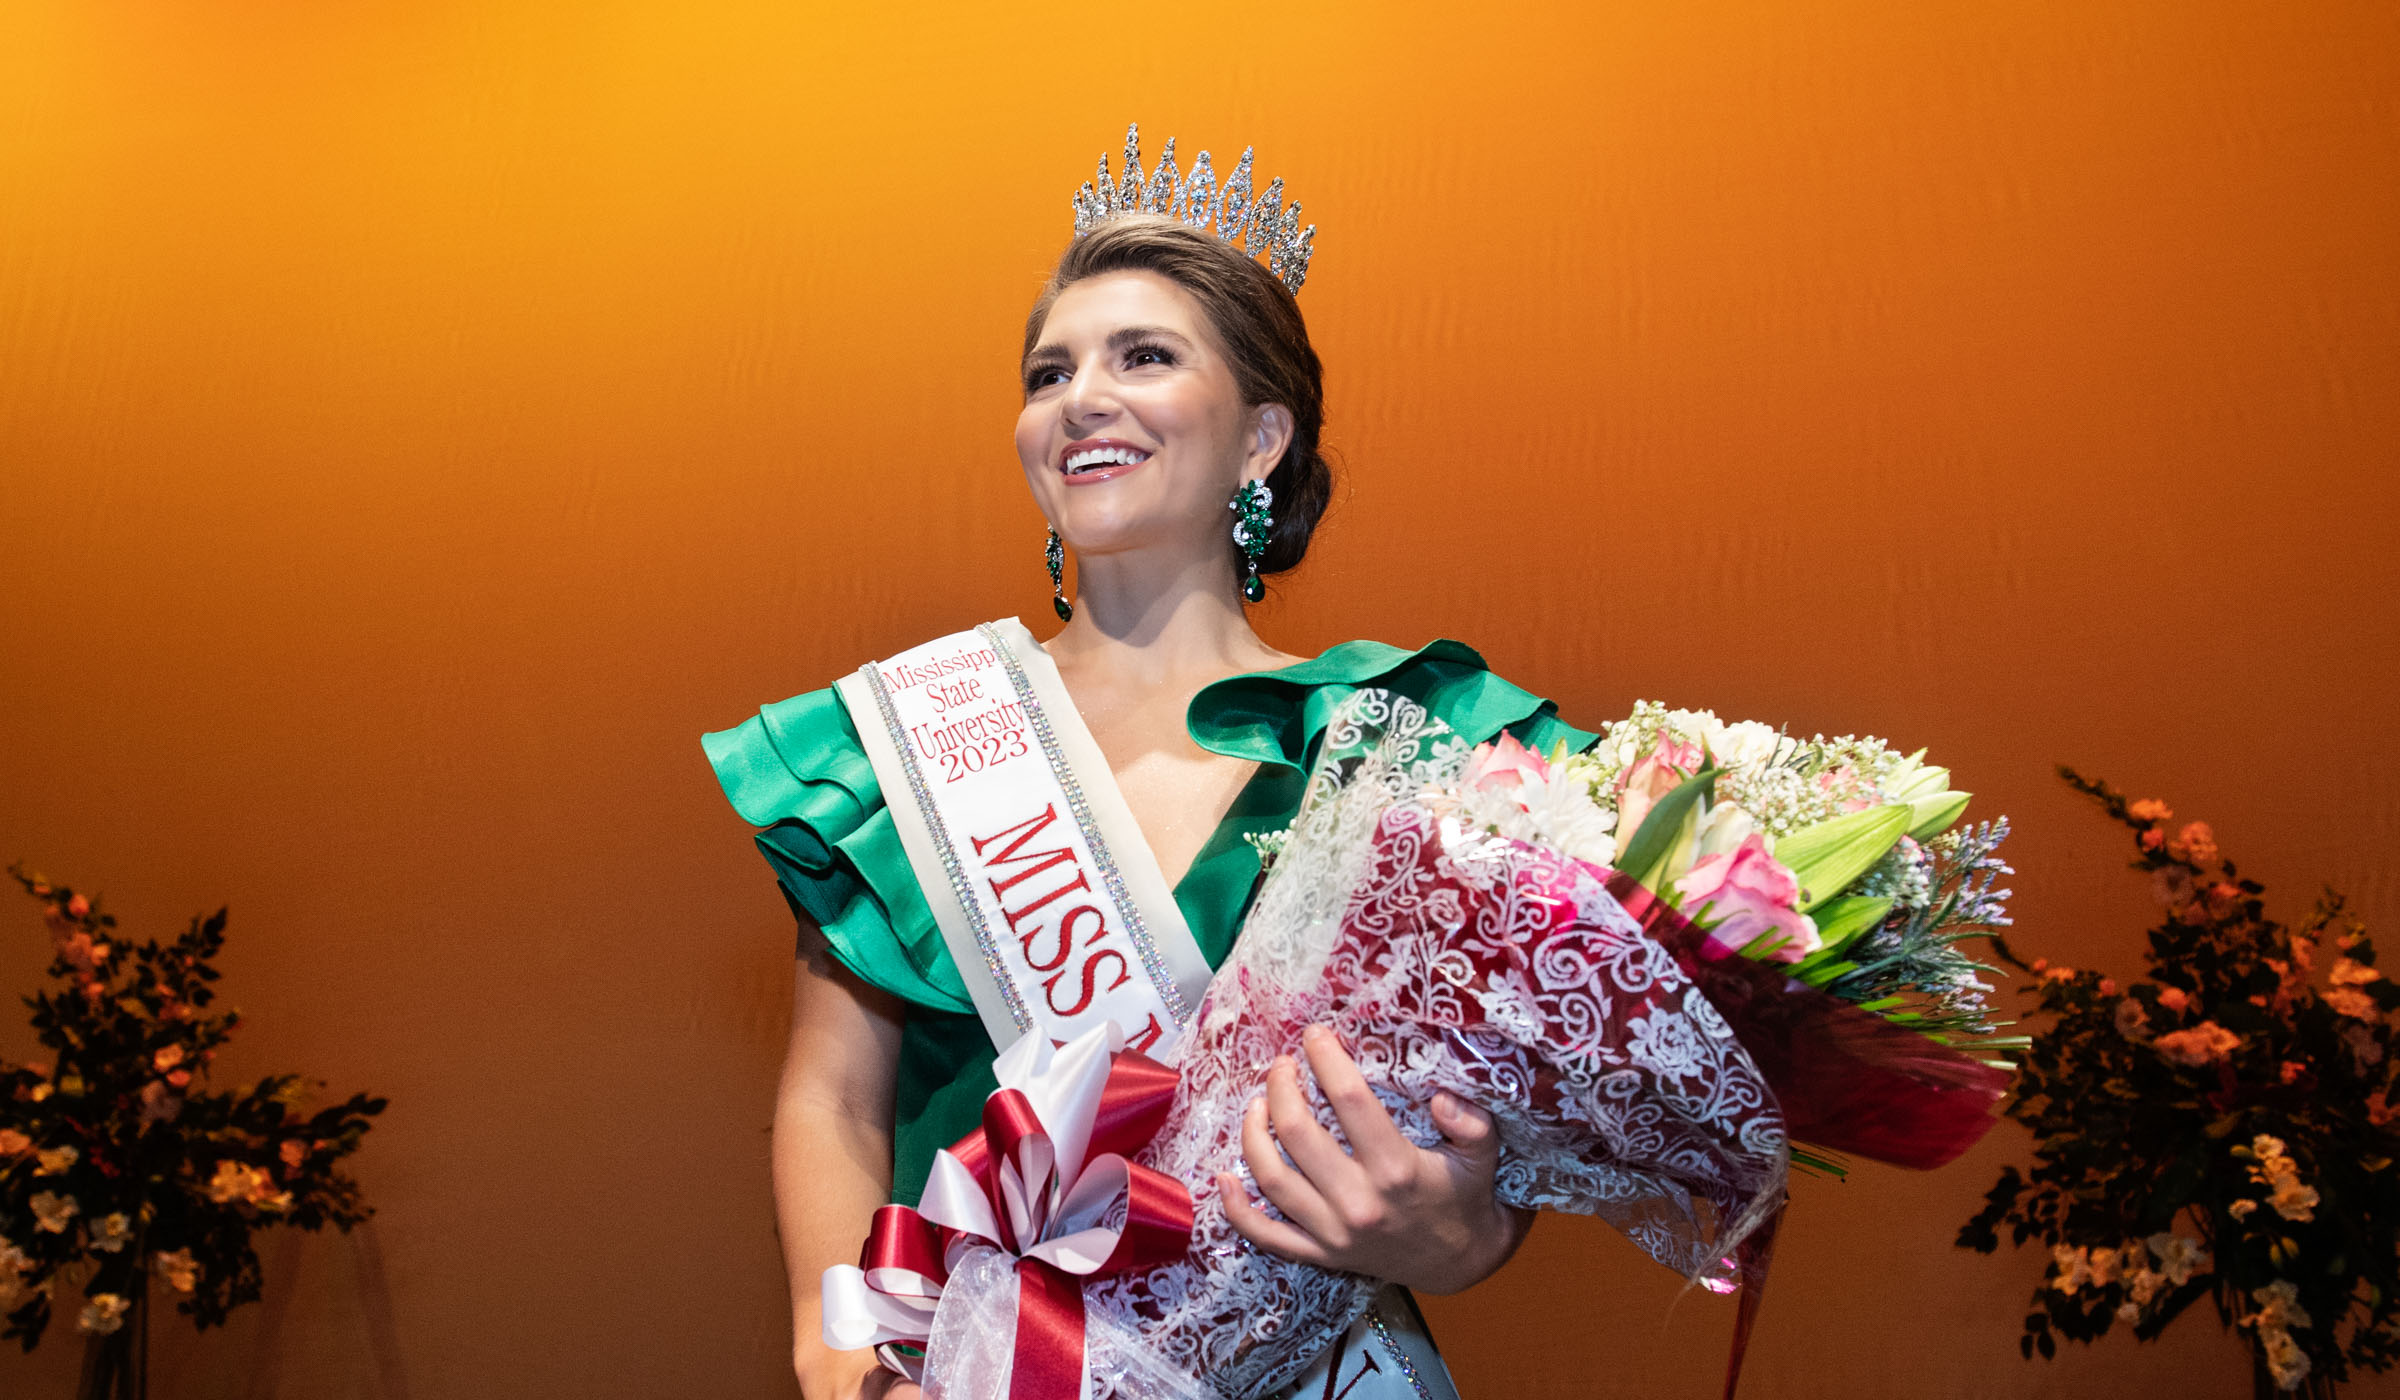 Miss Maroon &amp; White 2023 Madeleine Thompson just after winners were announced: with orange stage backdrop, holding flowers, and wearing Miss Maroon &amp; White sash and crown.